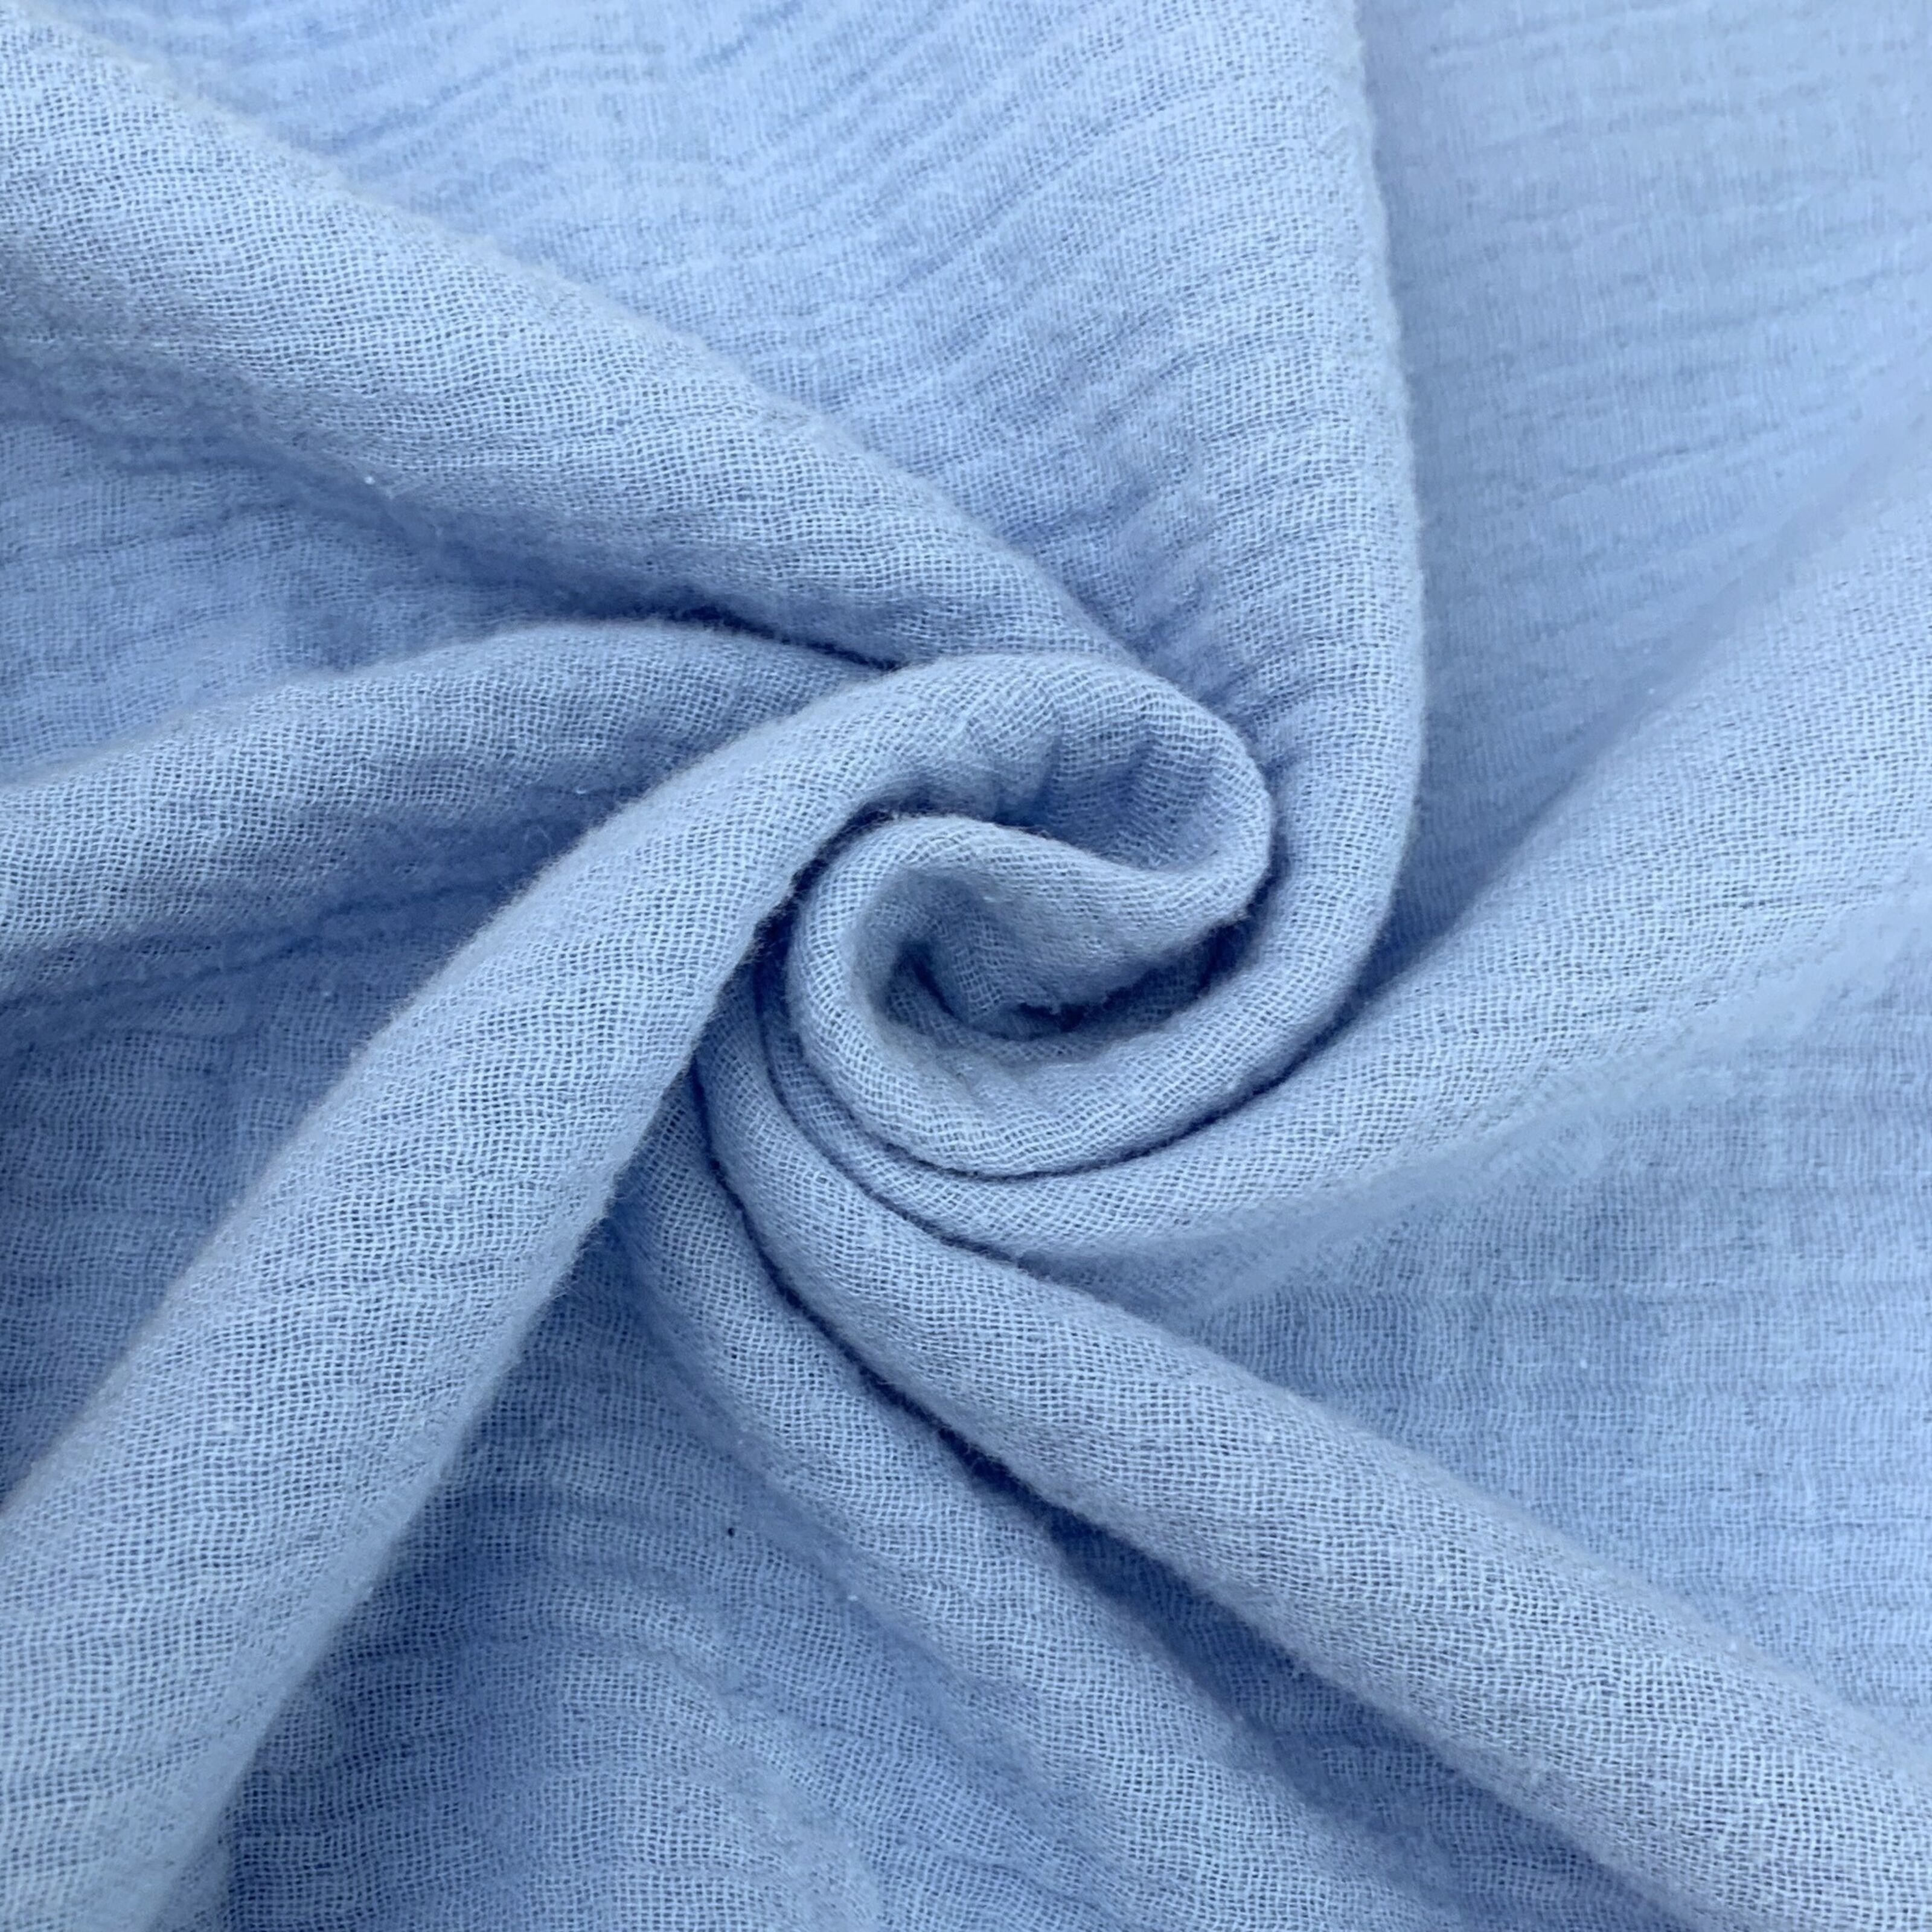 https://www.croftmill.co.uk/images/pictures/scans-of-fabric/00-2020/07-july-2020/double-gauze-pale-blue-folded-close-(gallery).jpg?v=5d054152